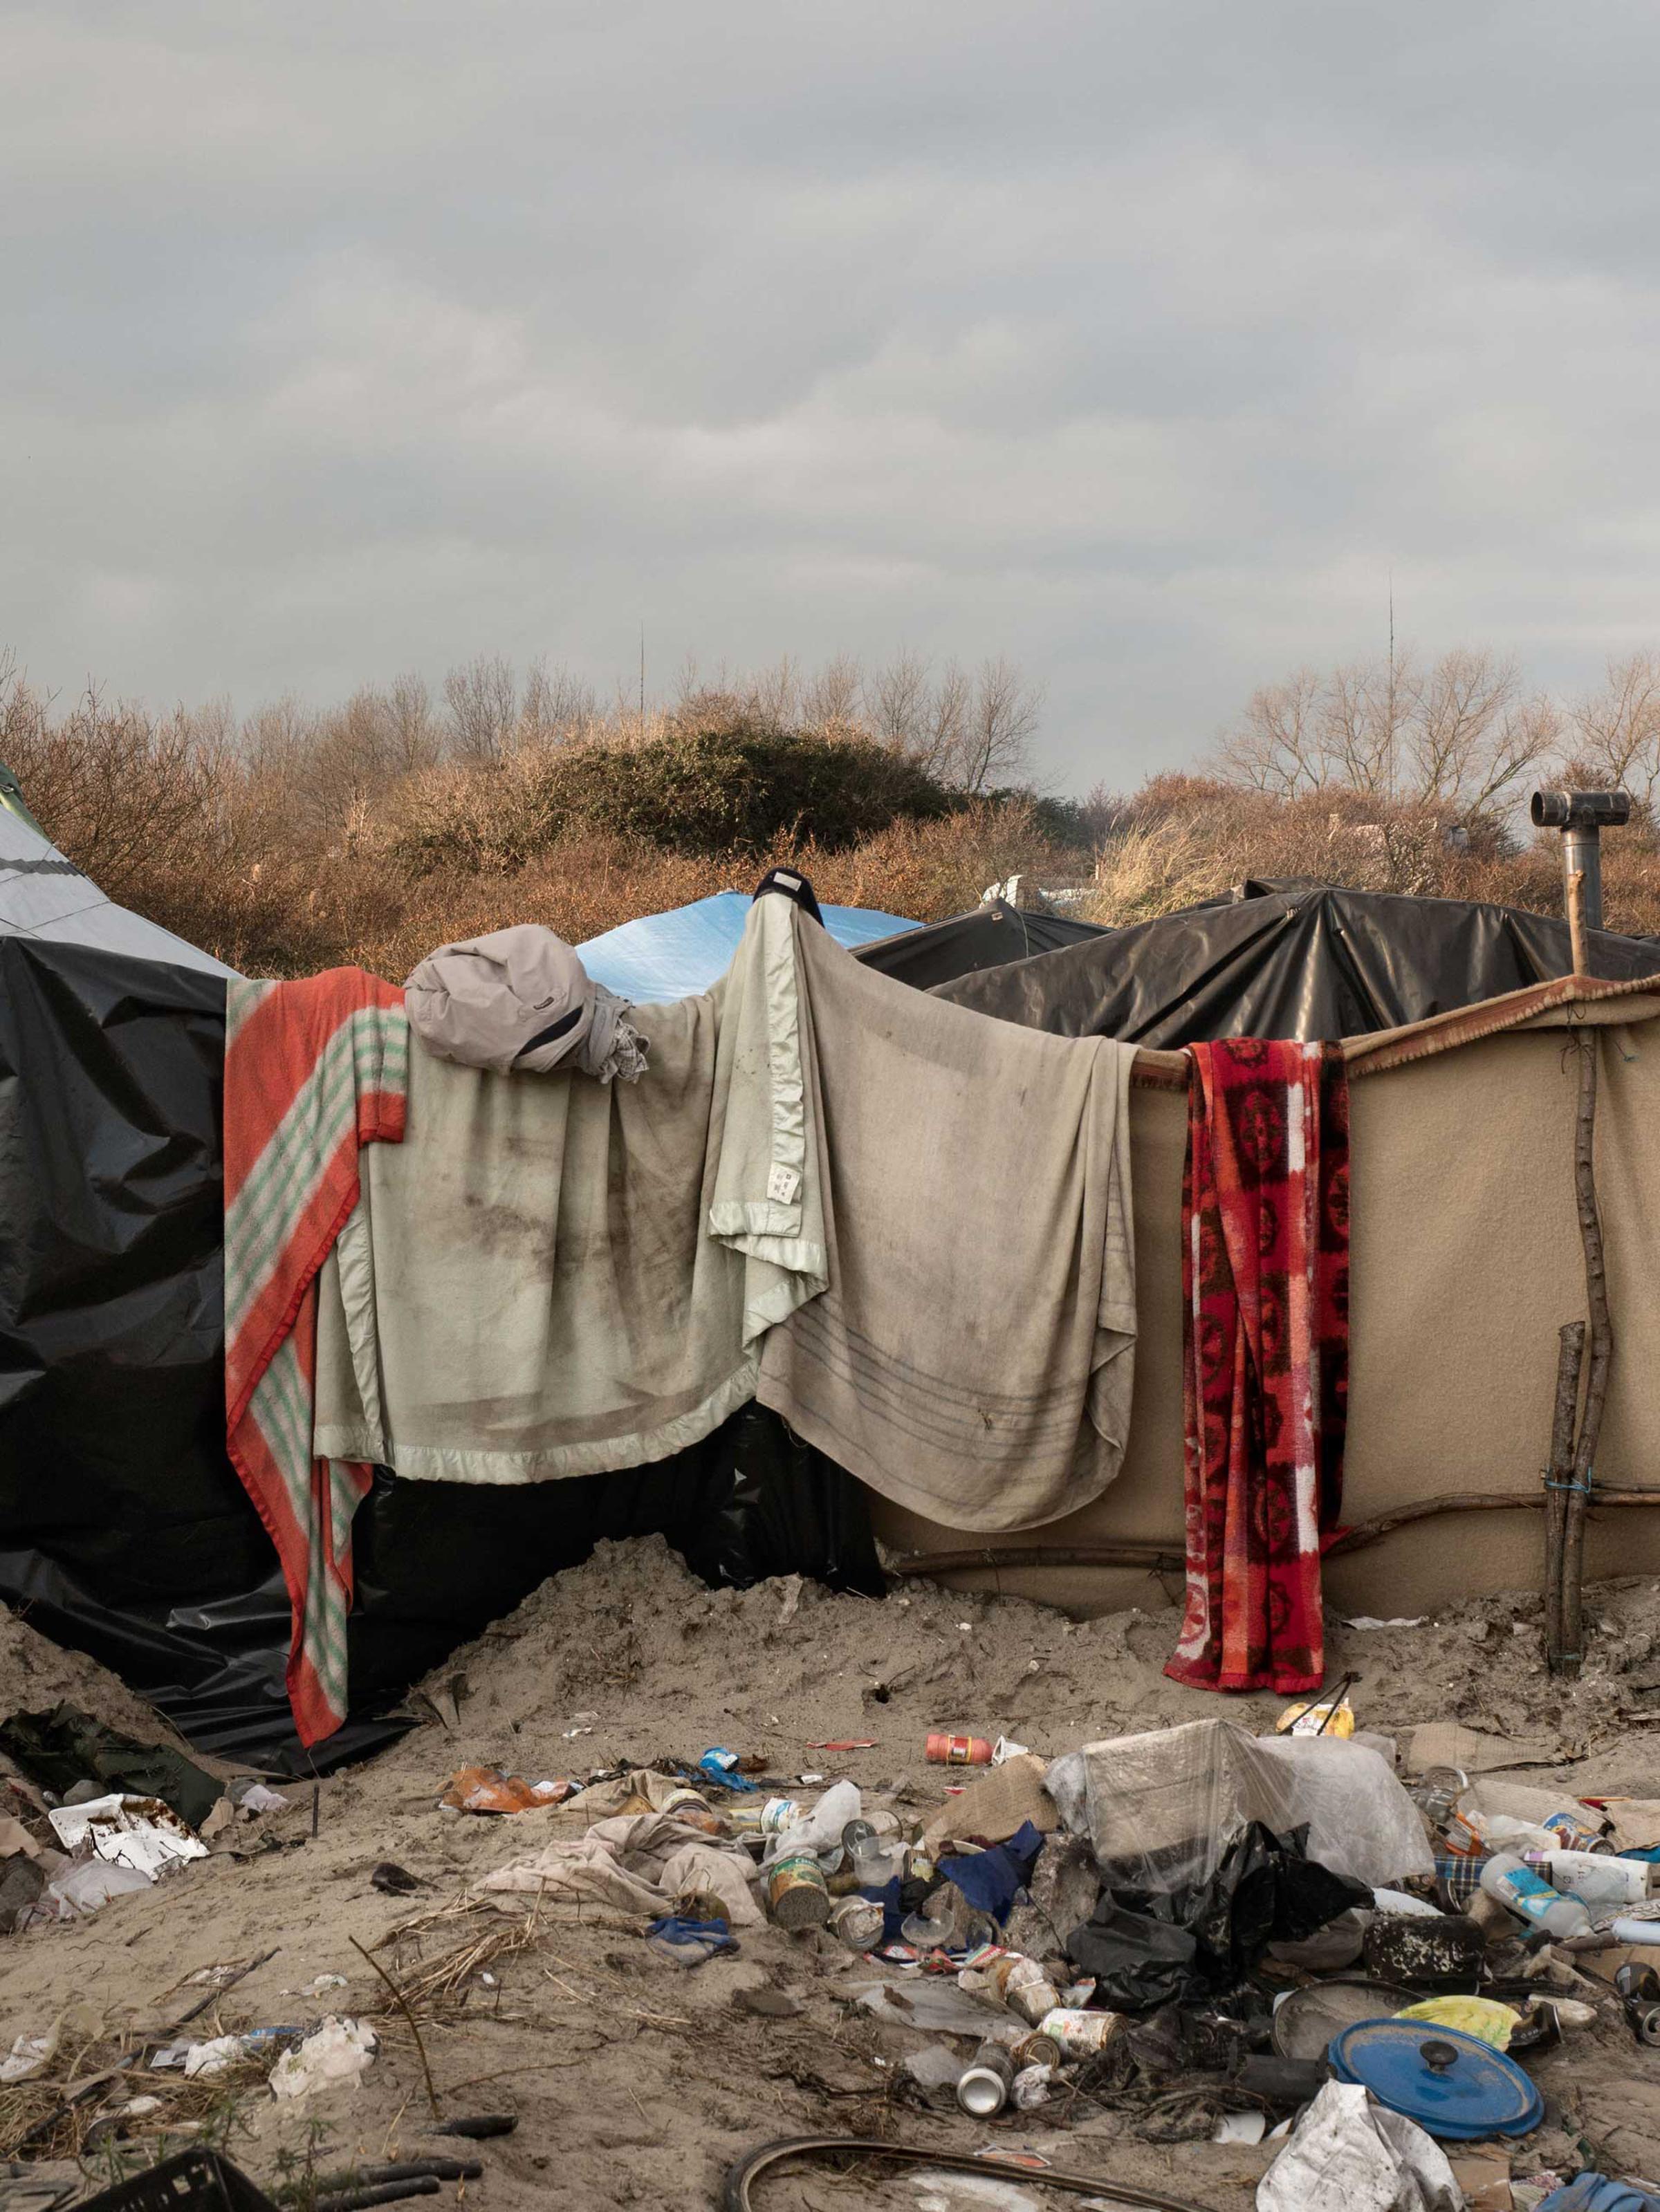 A dwelling for migrants in the "jungle" in Calais, France, Jan. 20, 2016.